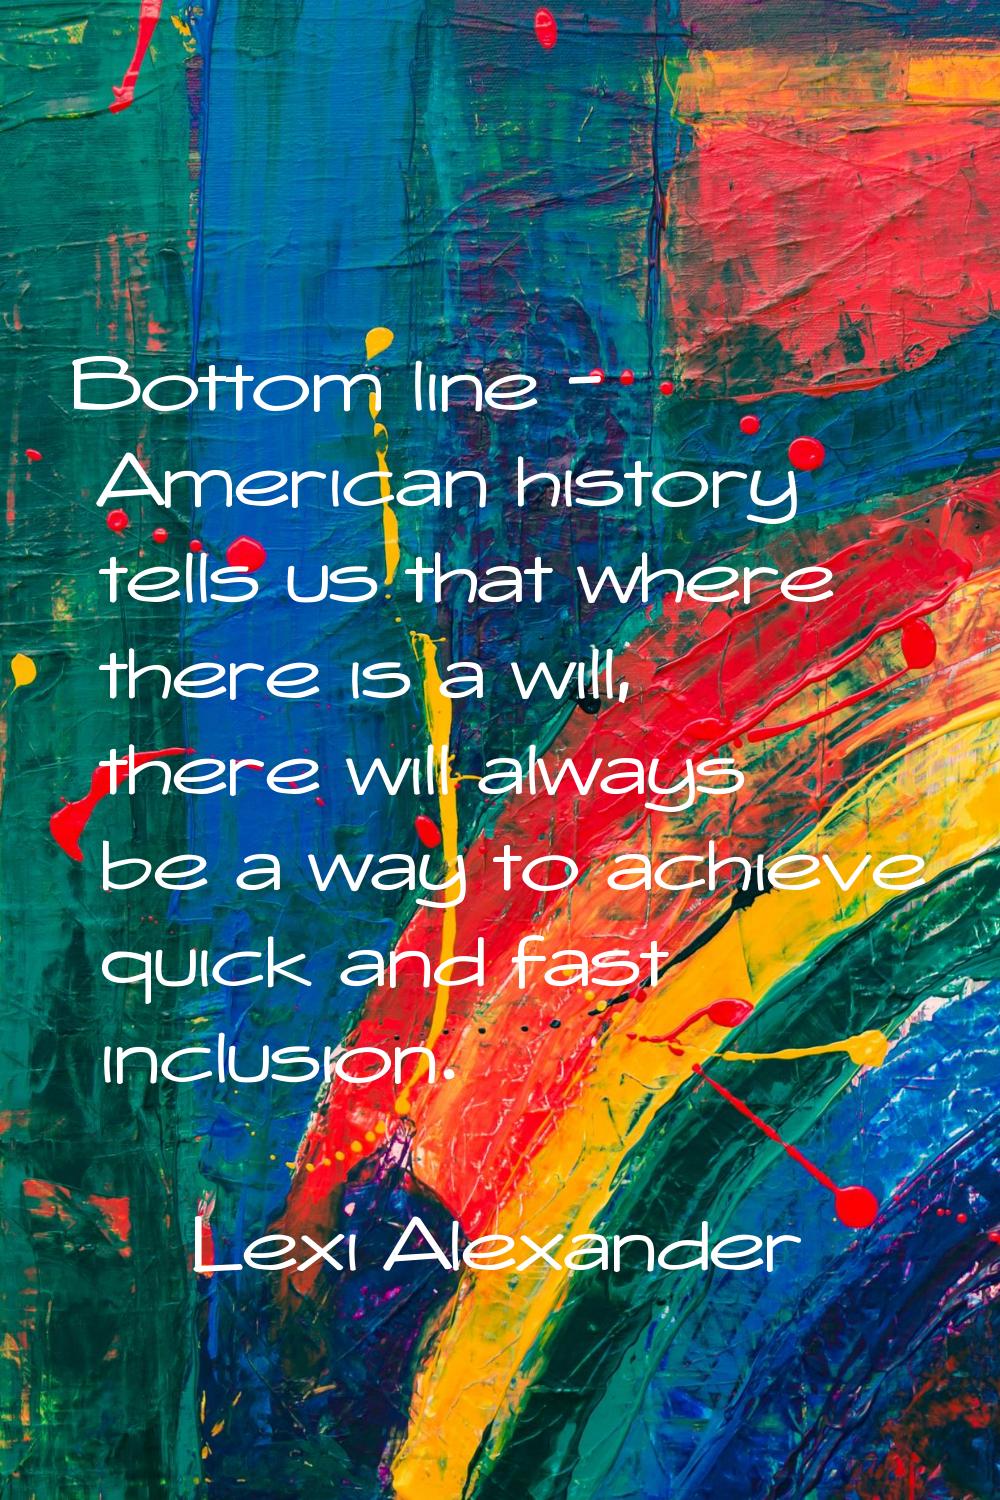 Bottom line - American history tells us that where there is a will, there will always be a way to a